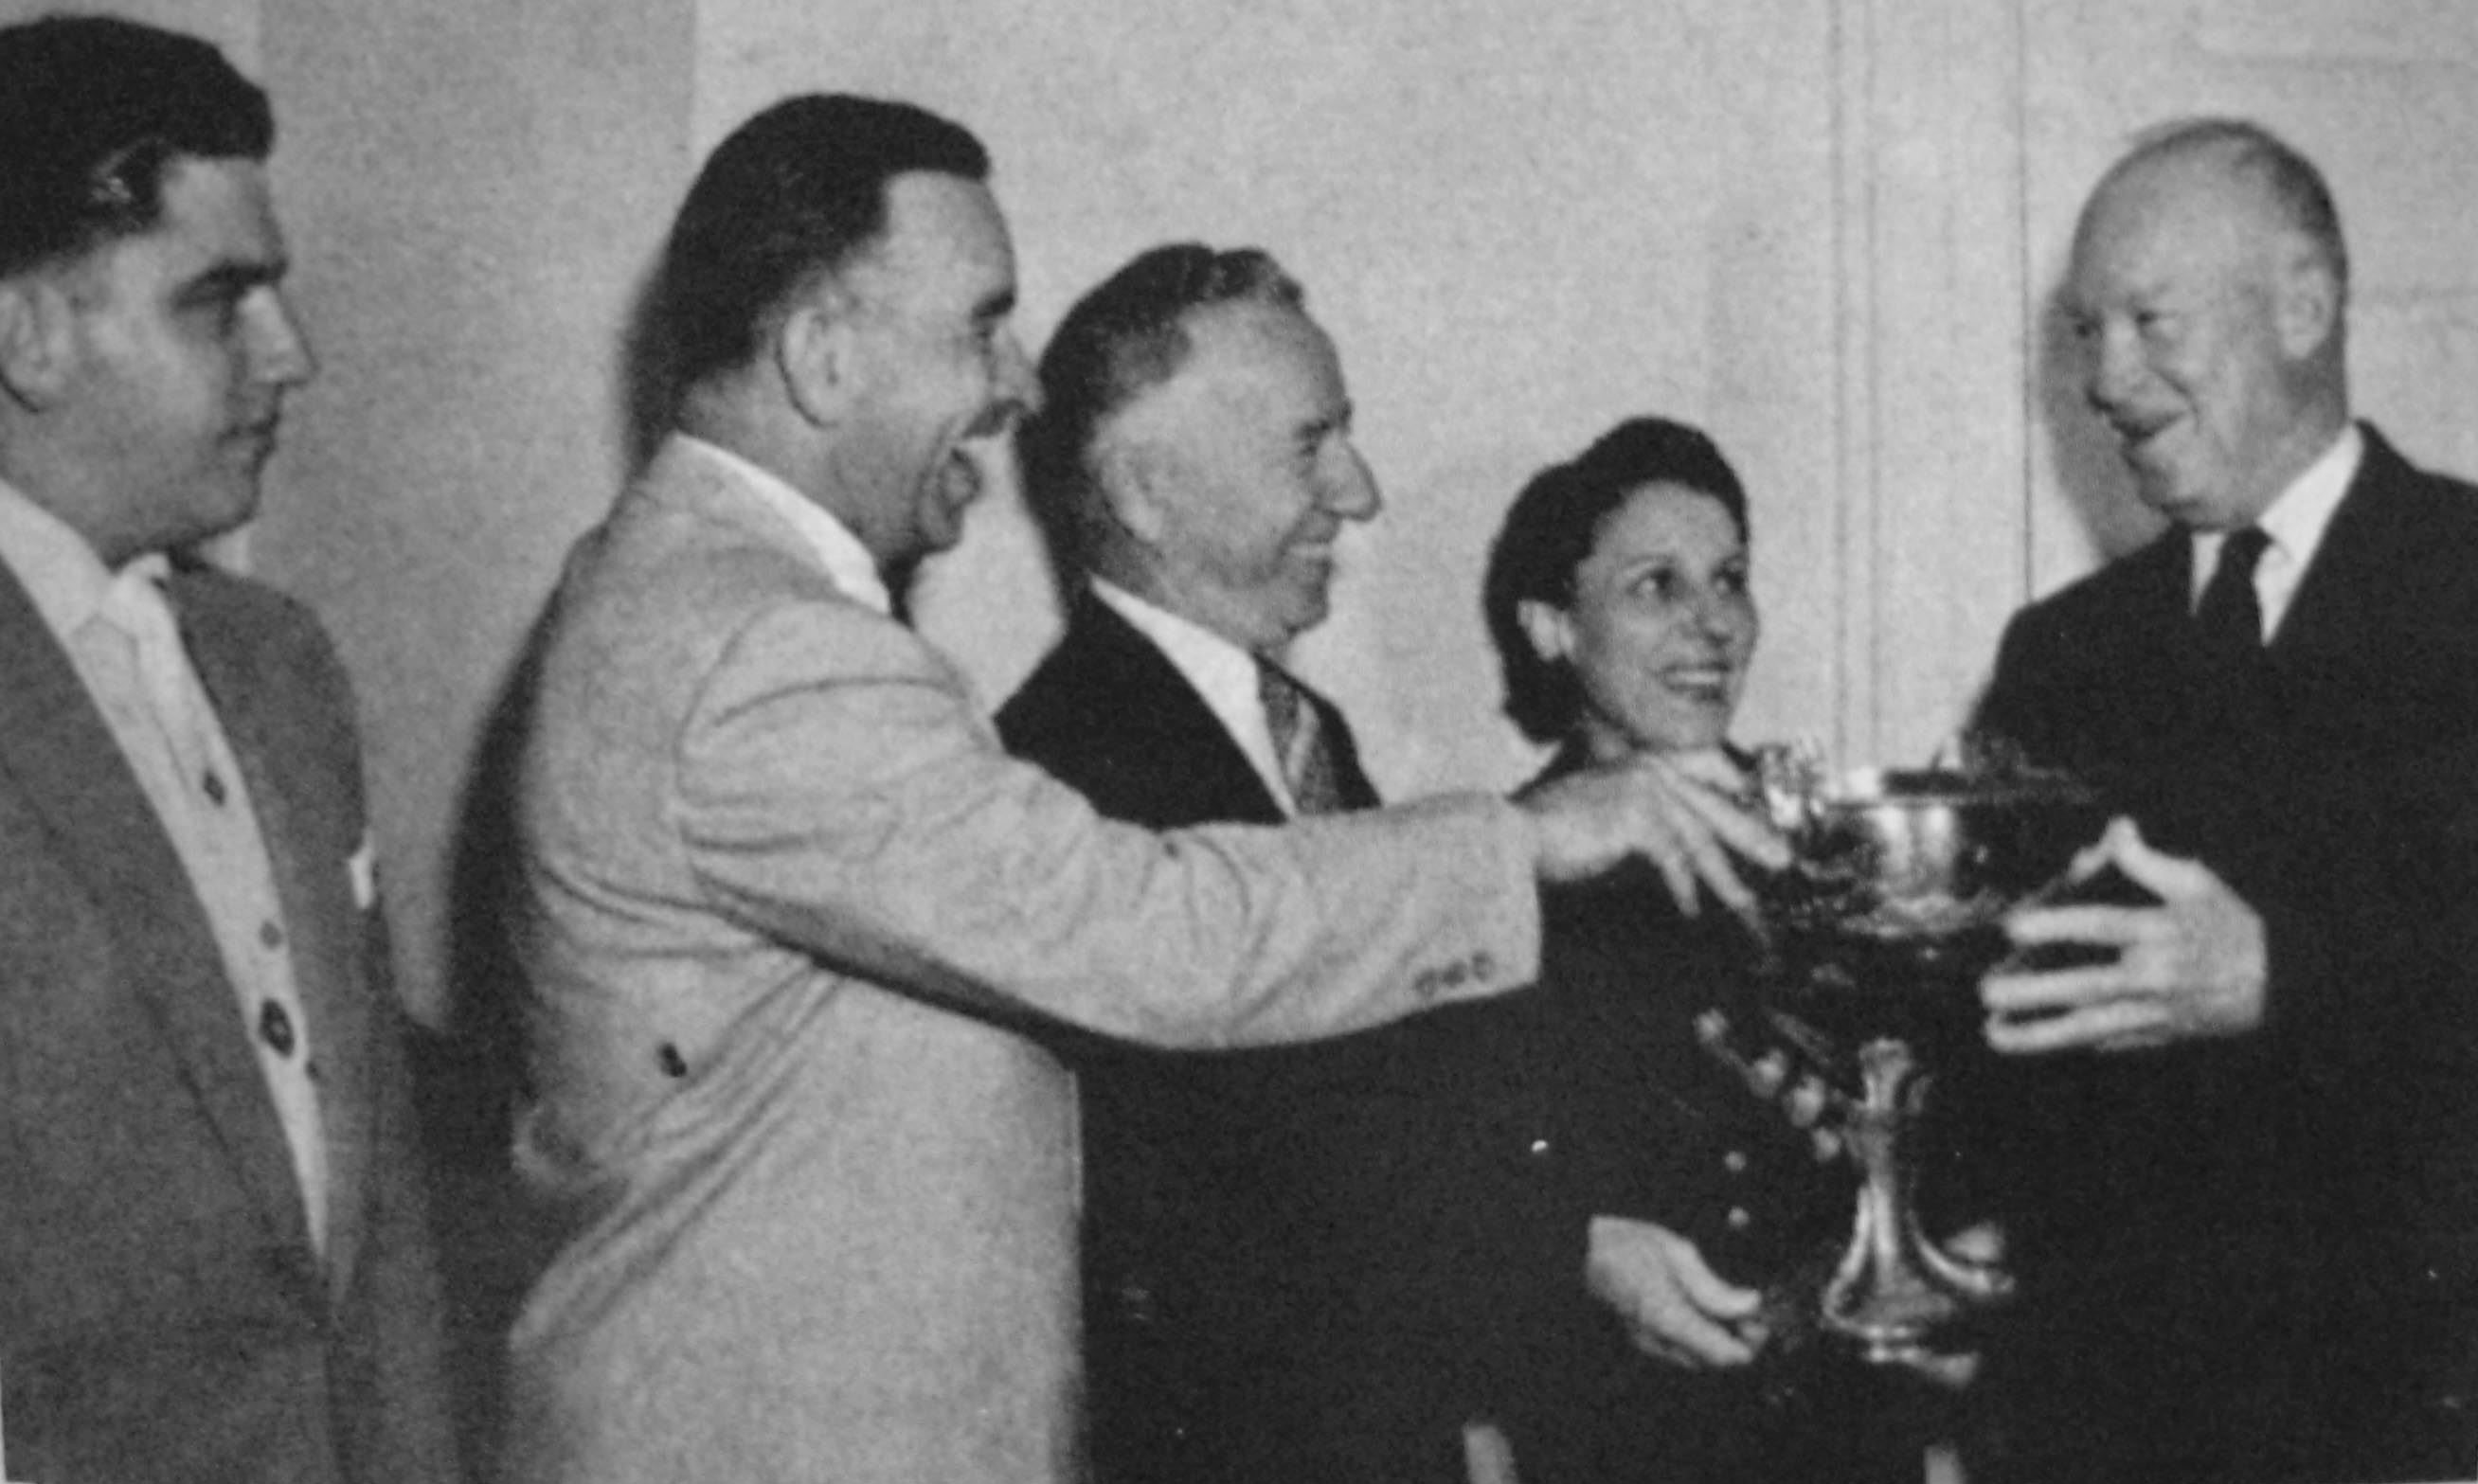 “Wild” Bill Cantrell, Joe and Millie Schoenith being presented
the President’s Cup by President Dwight D. Eisenhower